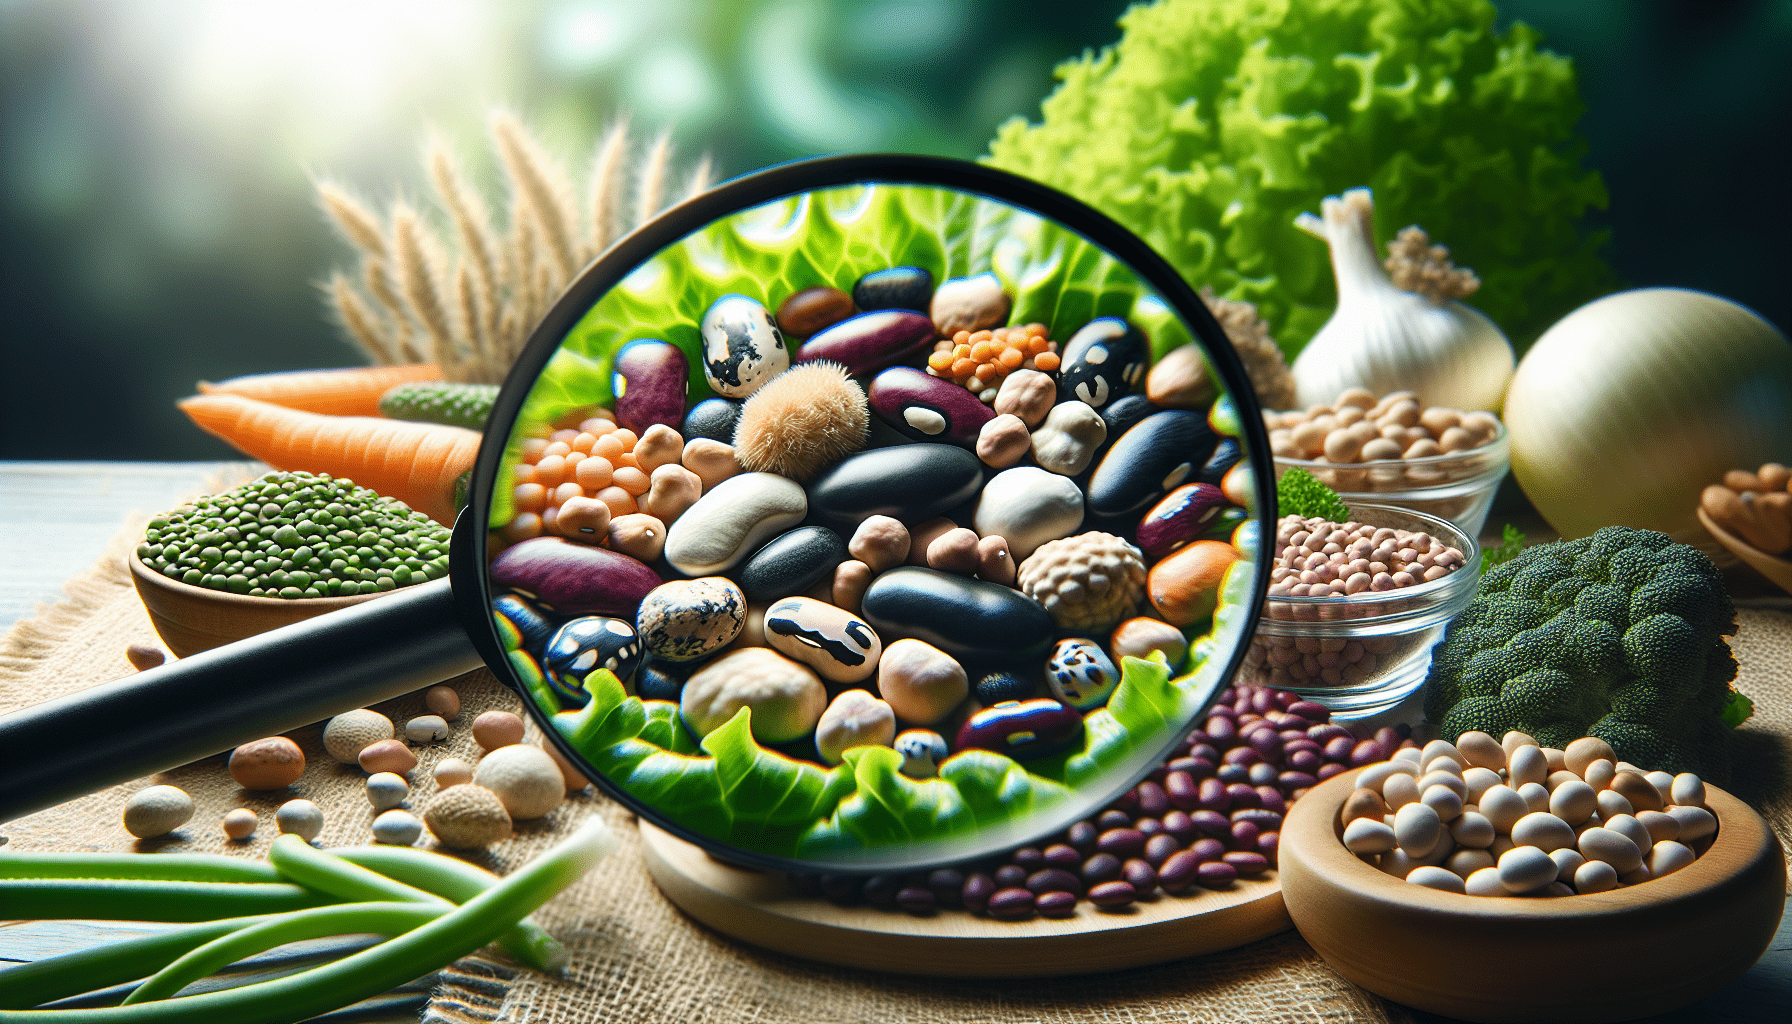 16 are there specific beans that are beneficial for vegetarian and vegan diets